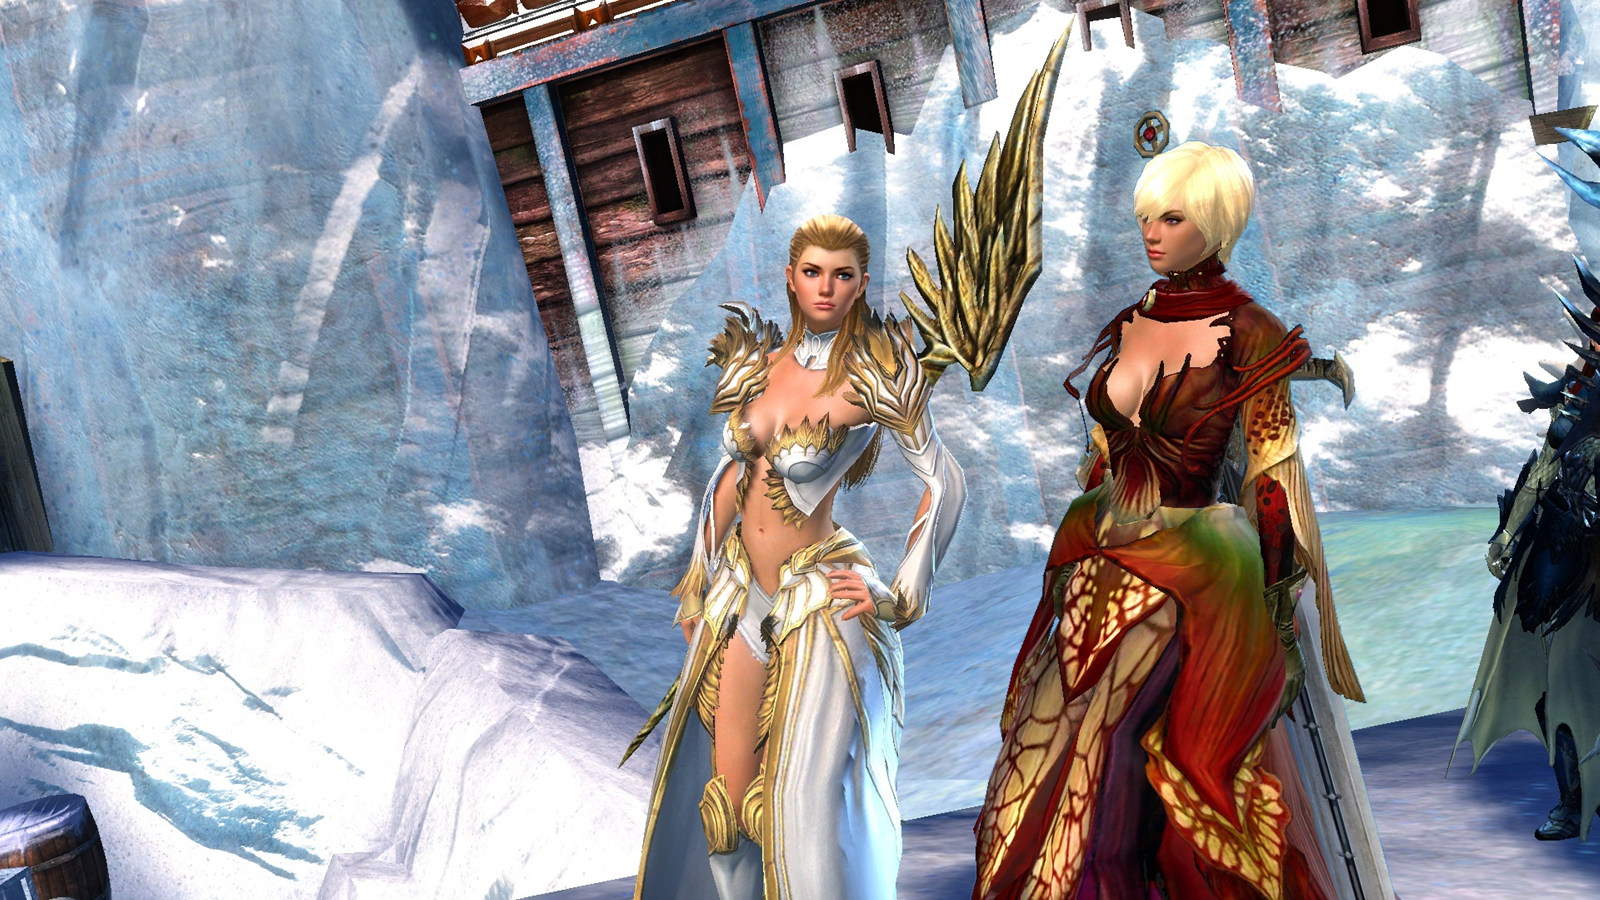 Guild Wars 2 - Light Armor Screenshot - White and Red